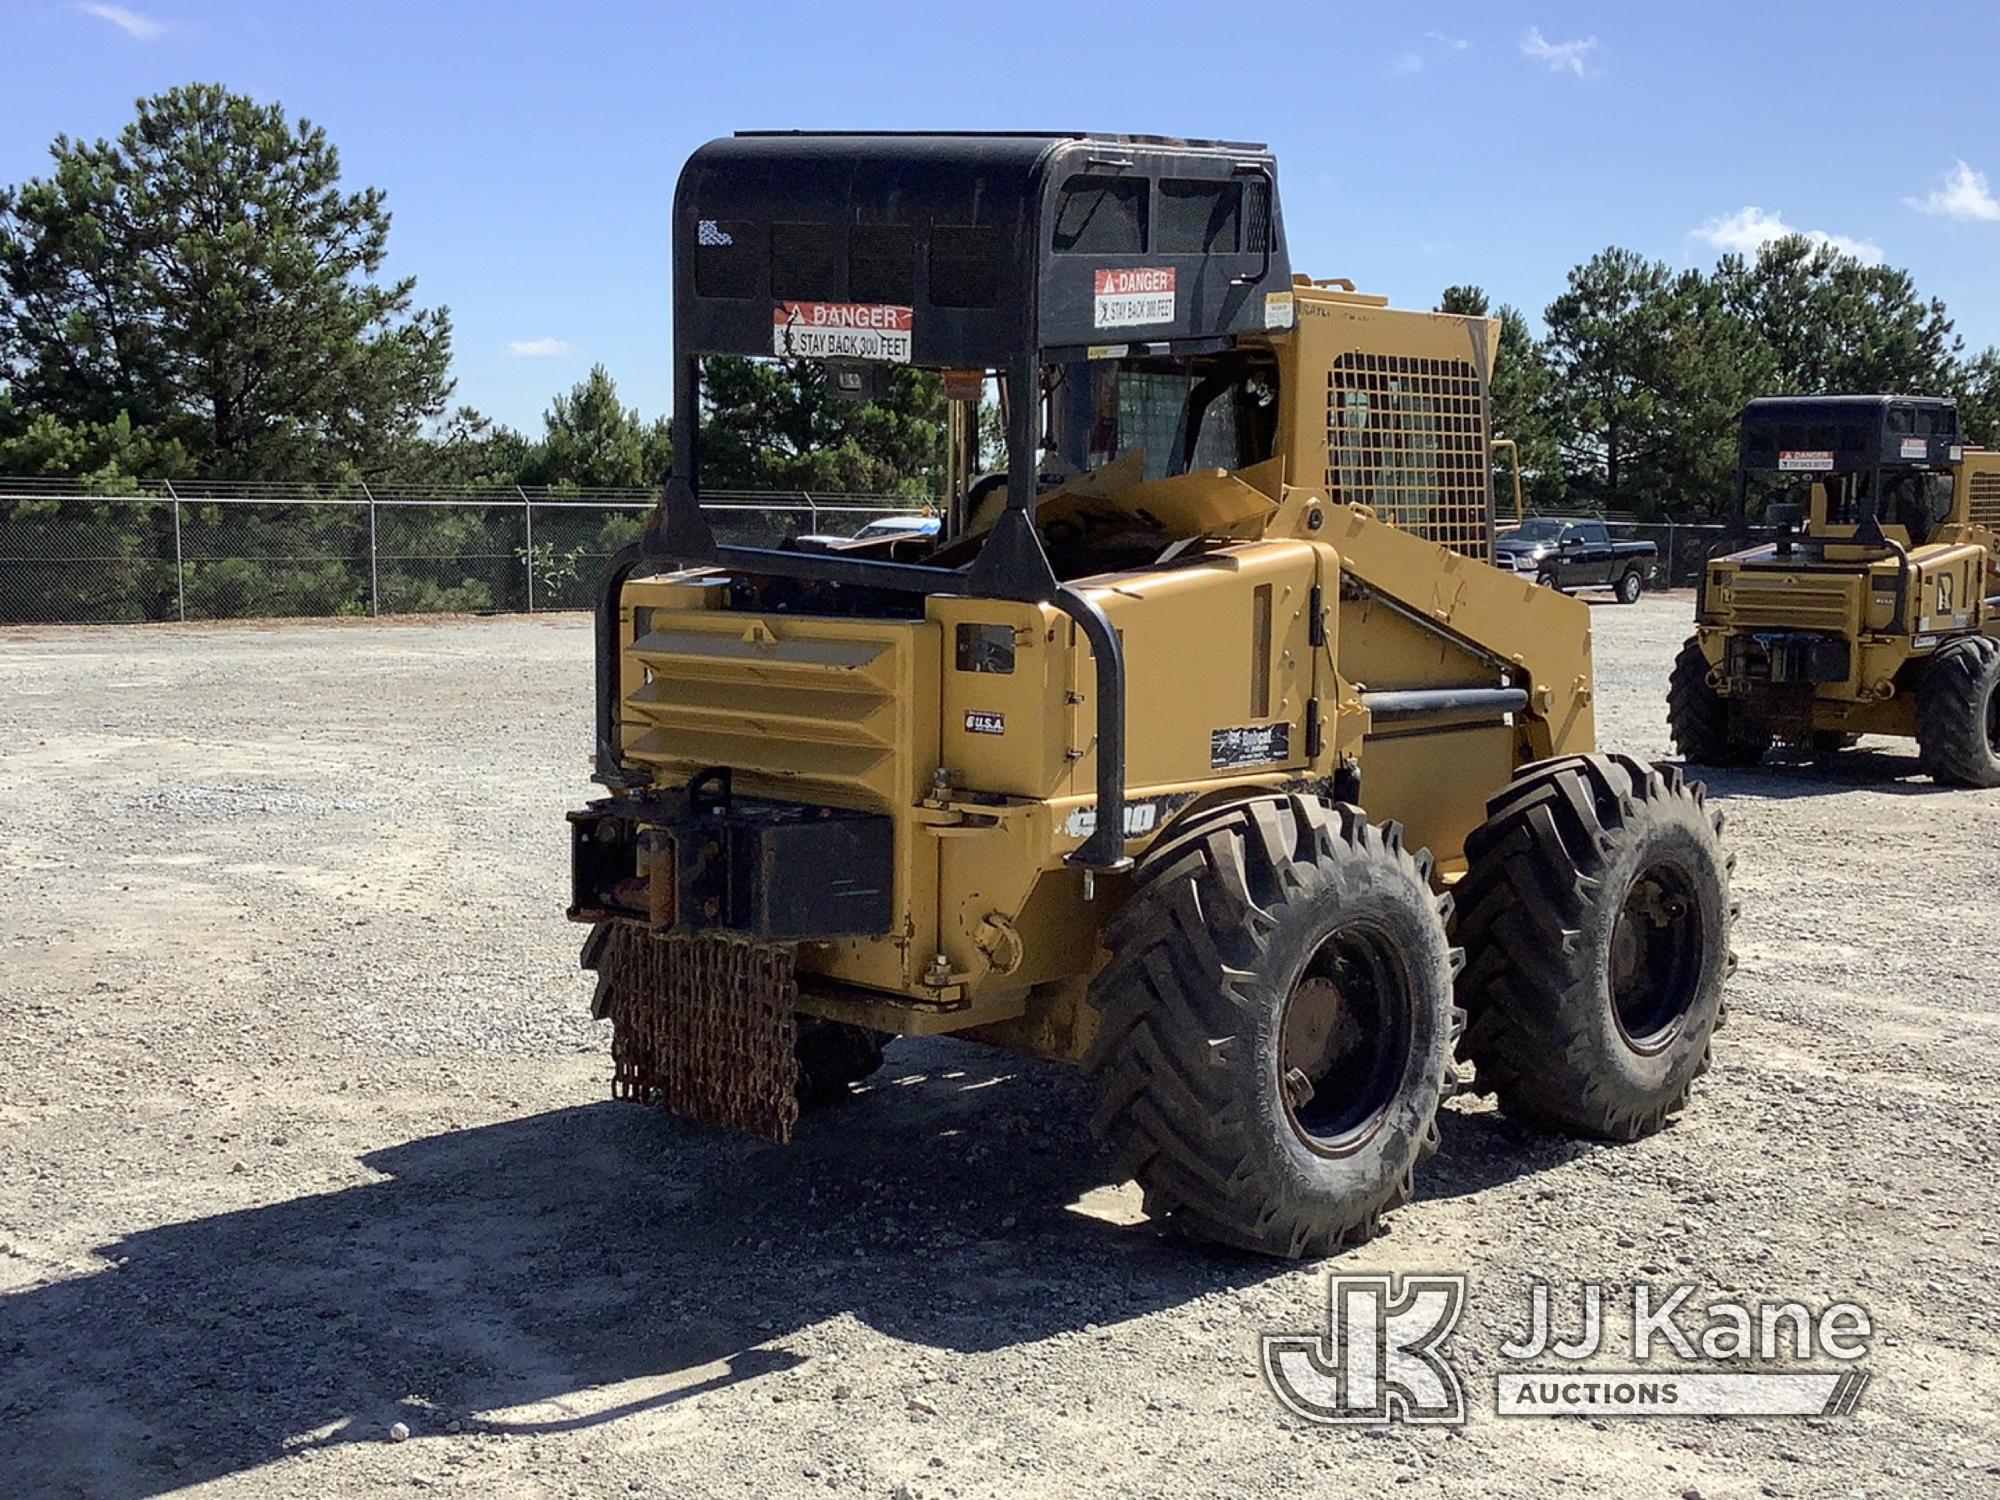 (Villa Rica, GA) 2017 Rayco C100T Rubber Tired Skid Steer Loader Not Running, Condition Unknown, Hou